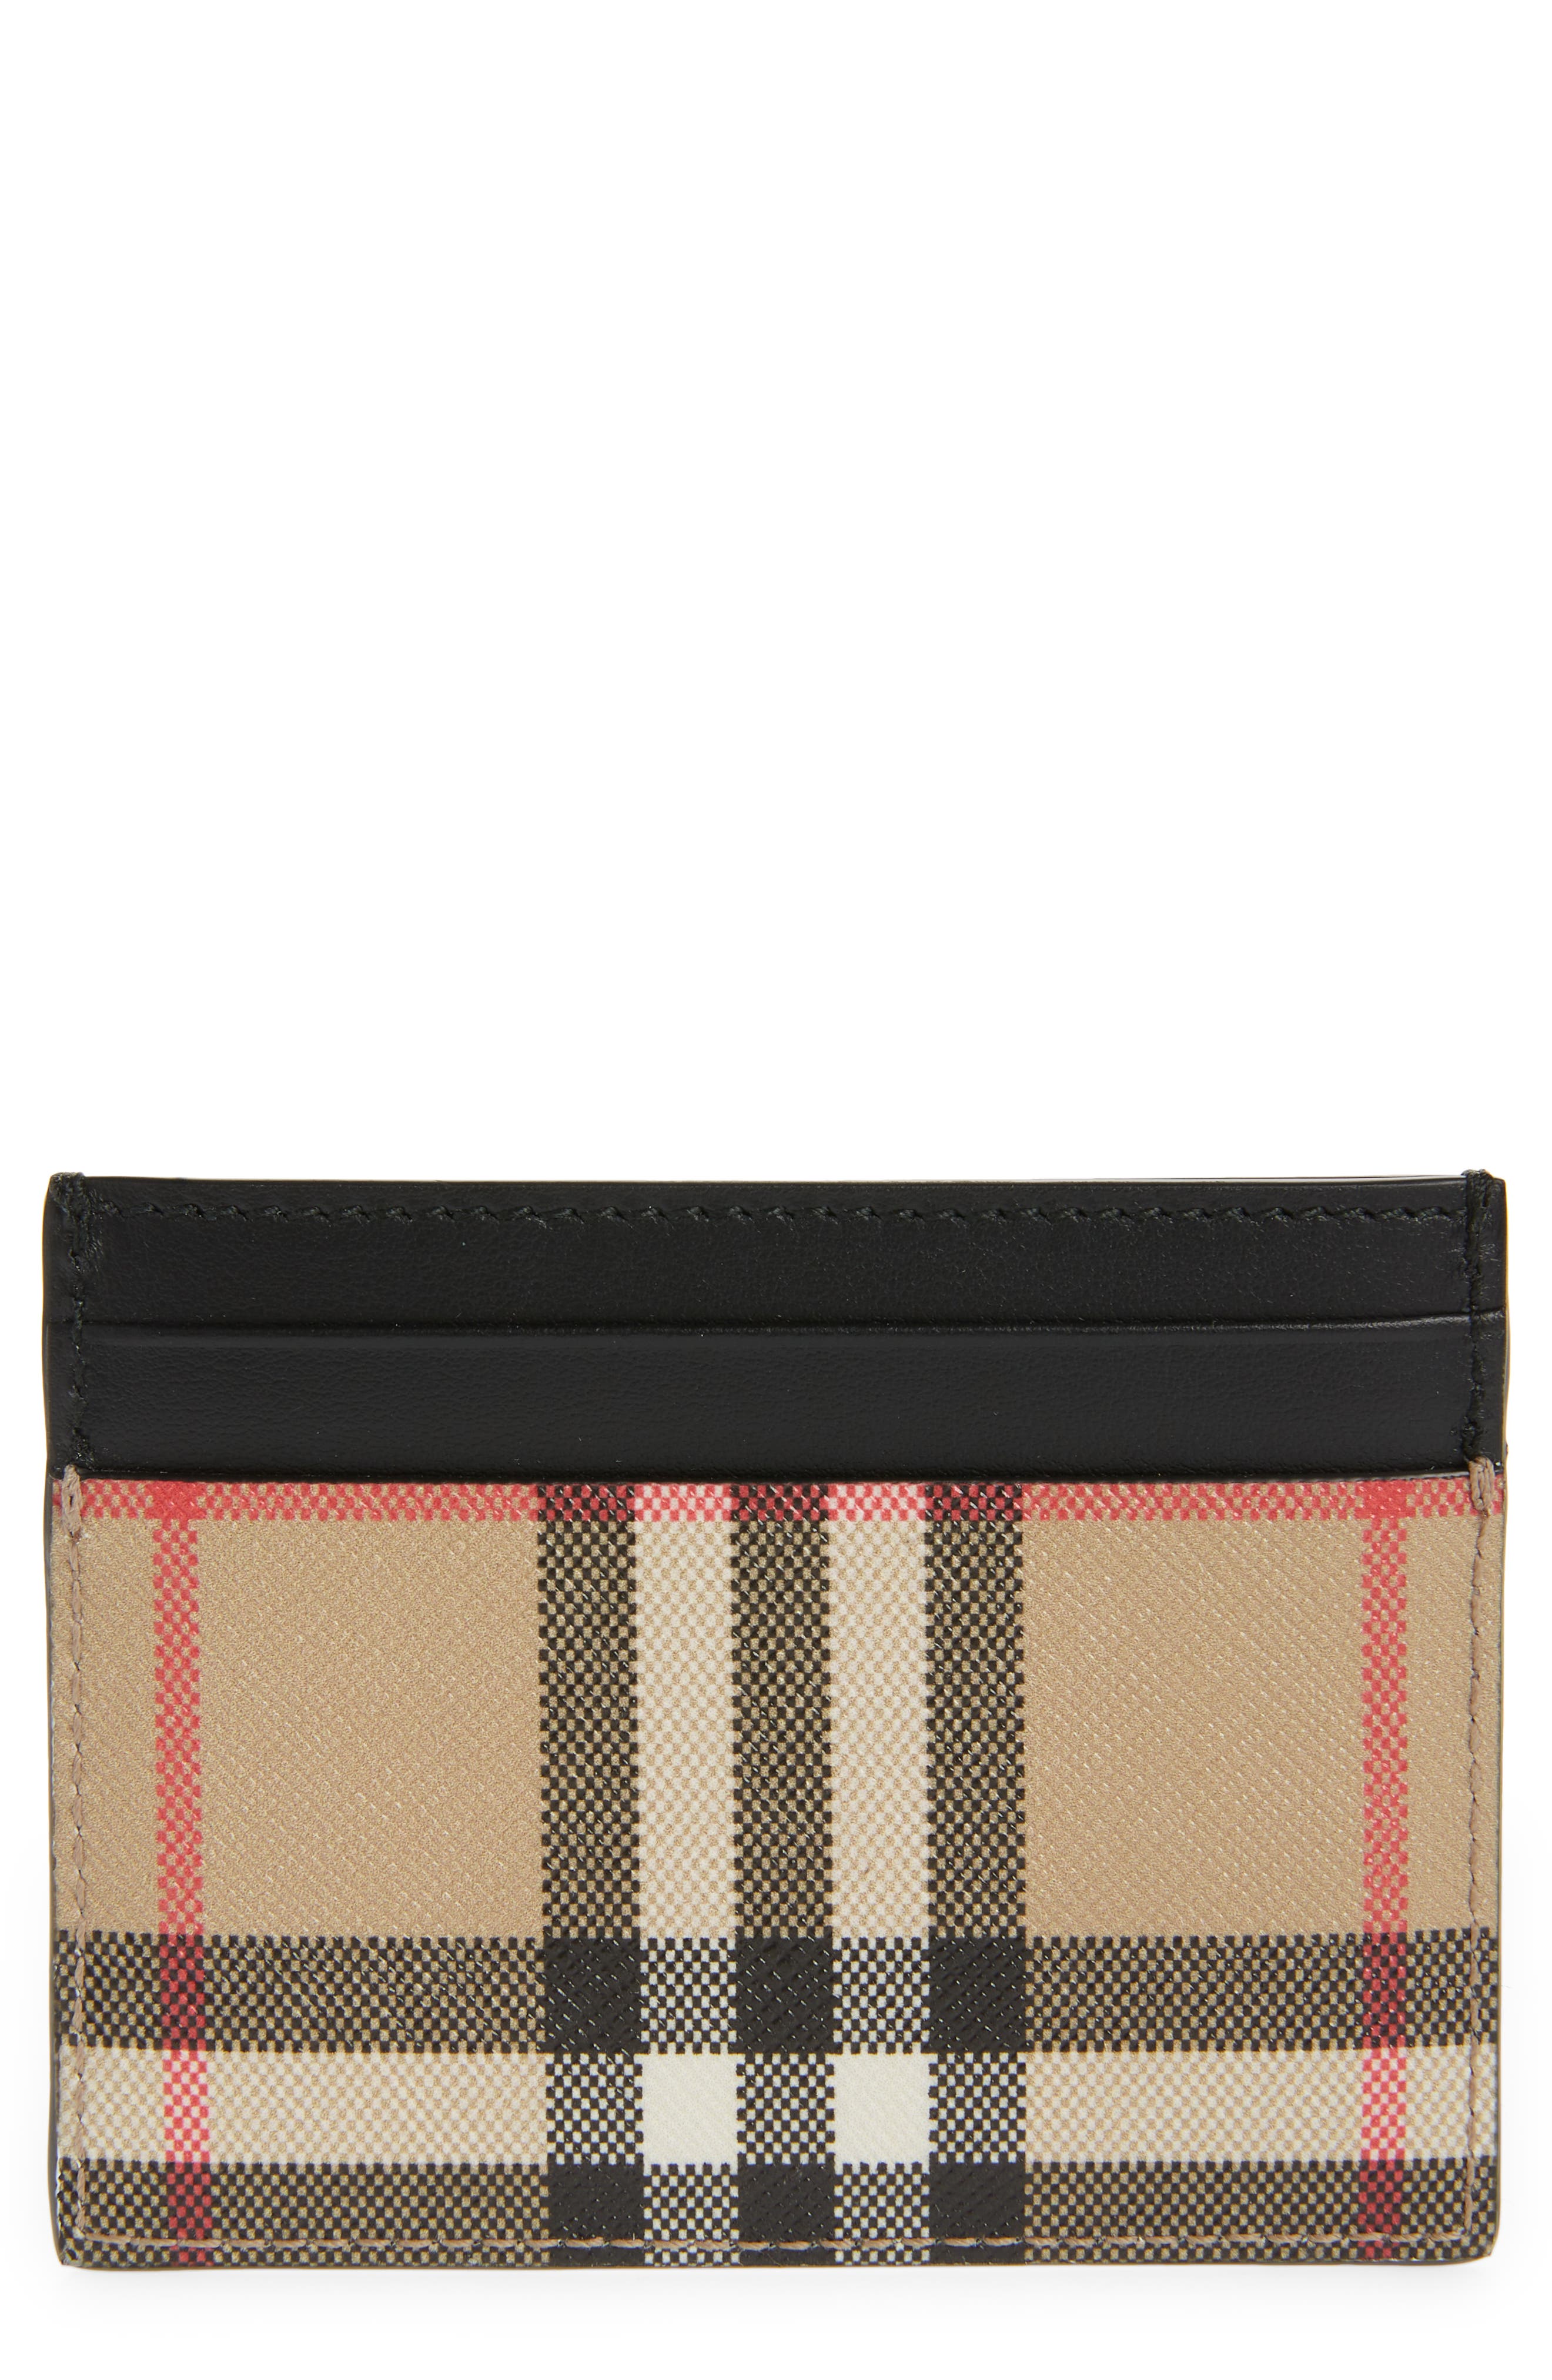 Burberry Sandon Check E-Canvas & Leather Card Case in Black at Nordstrom